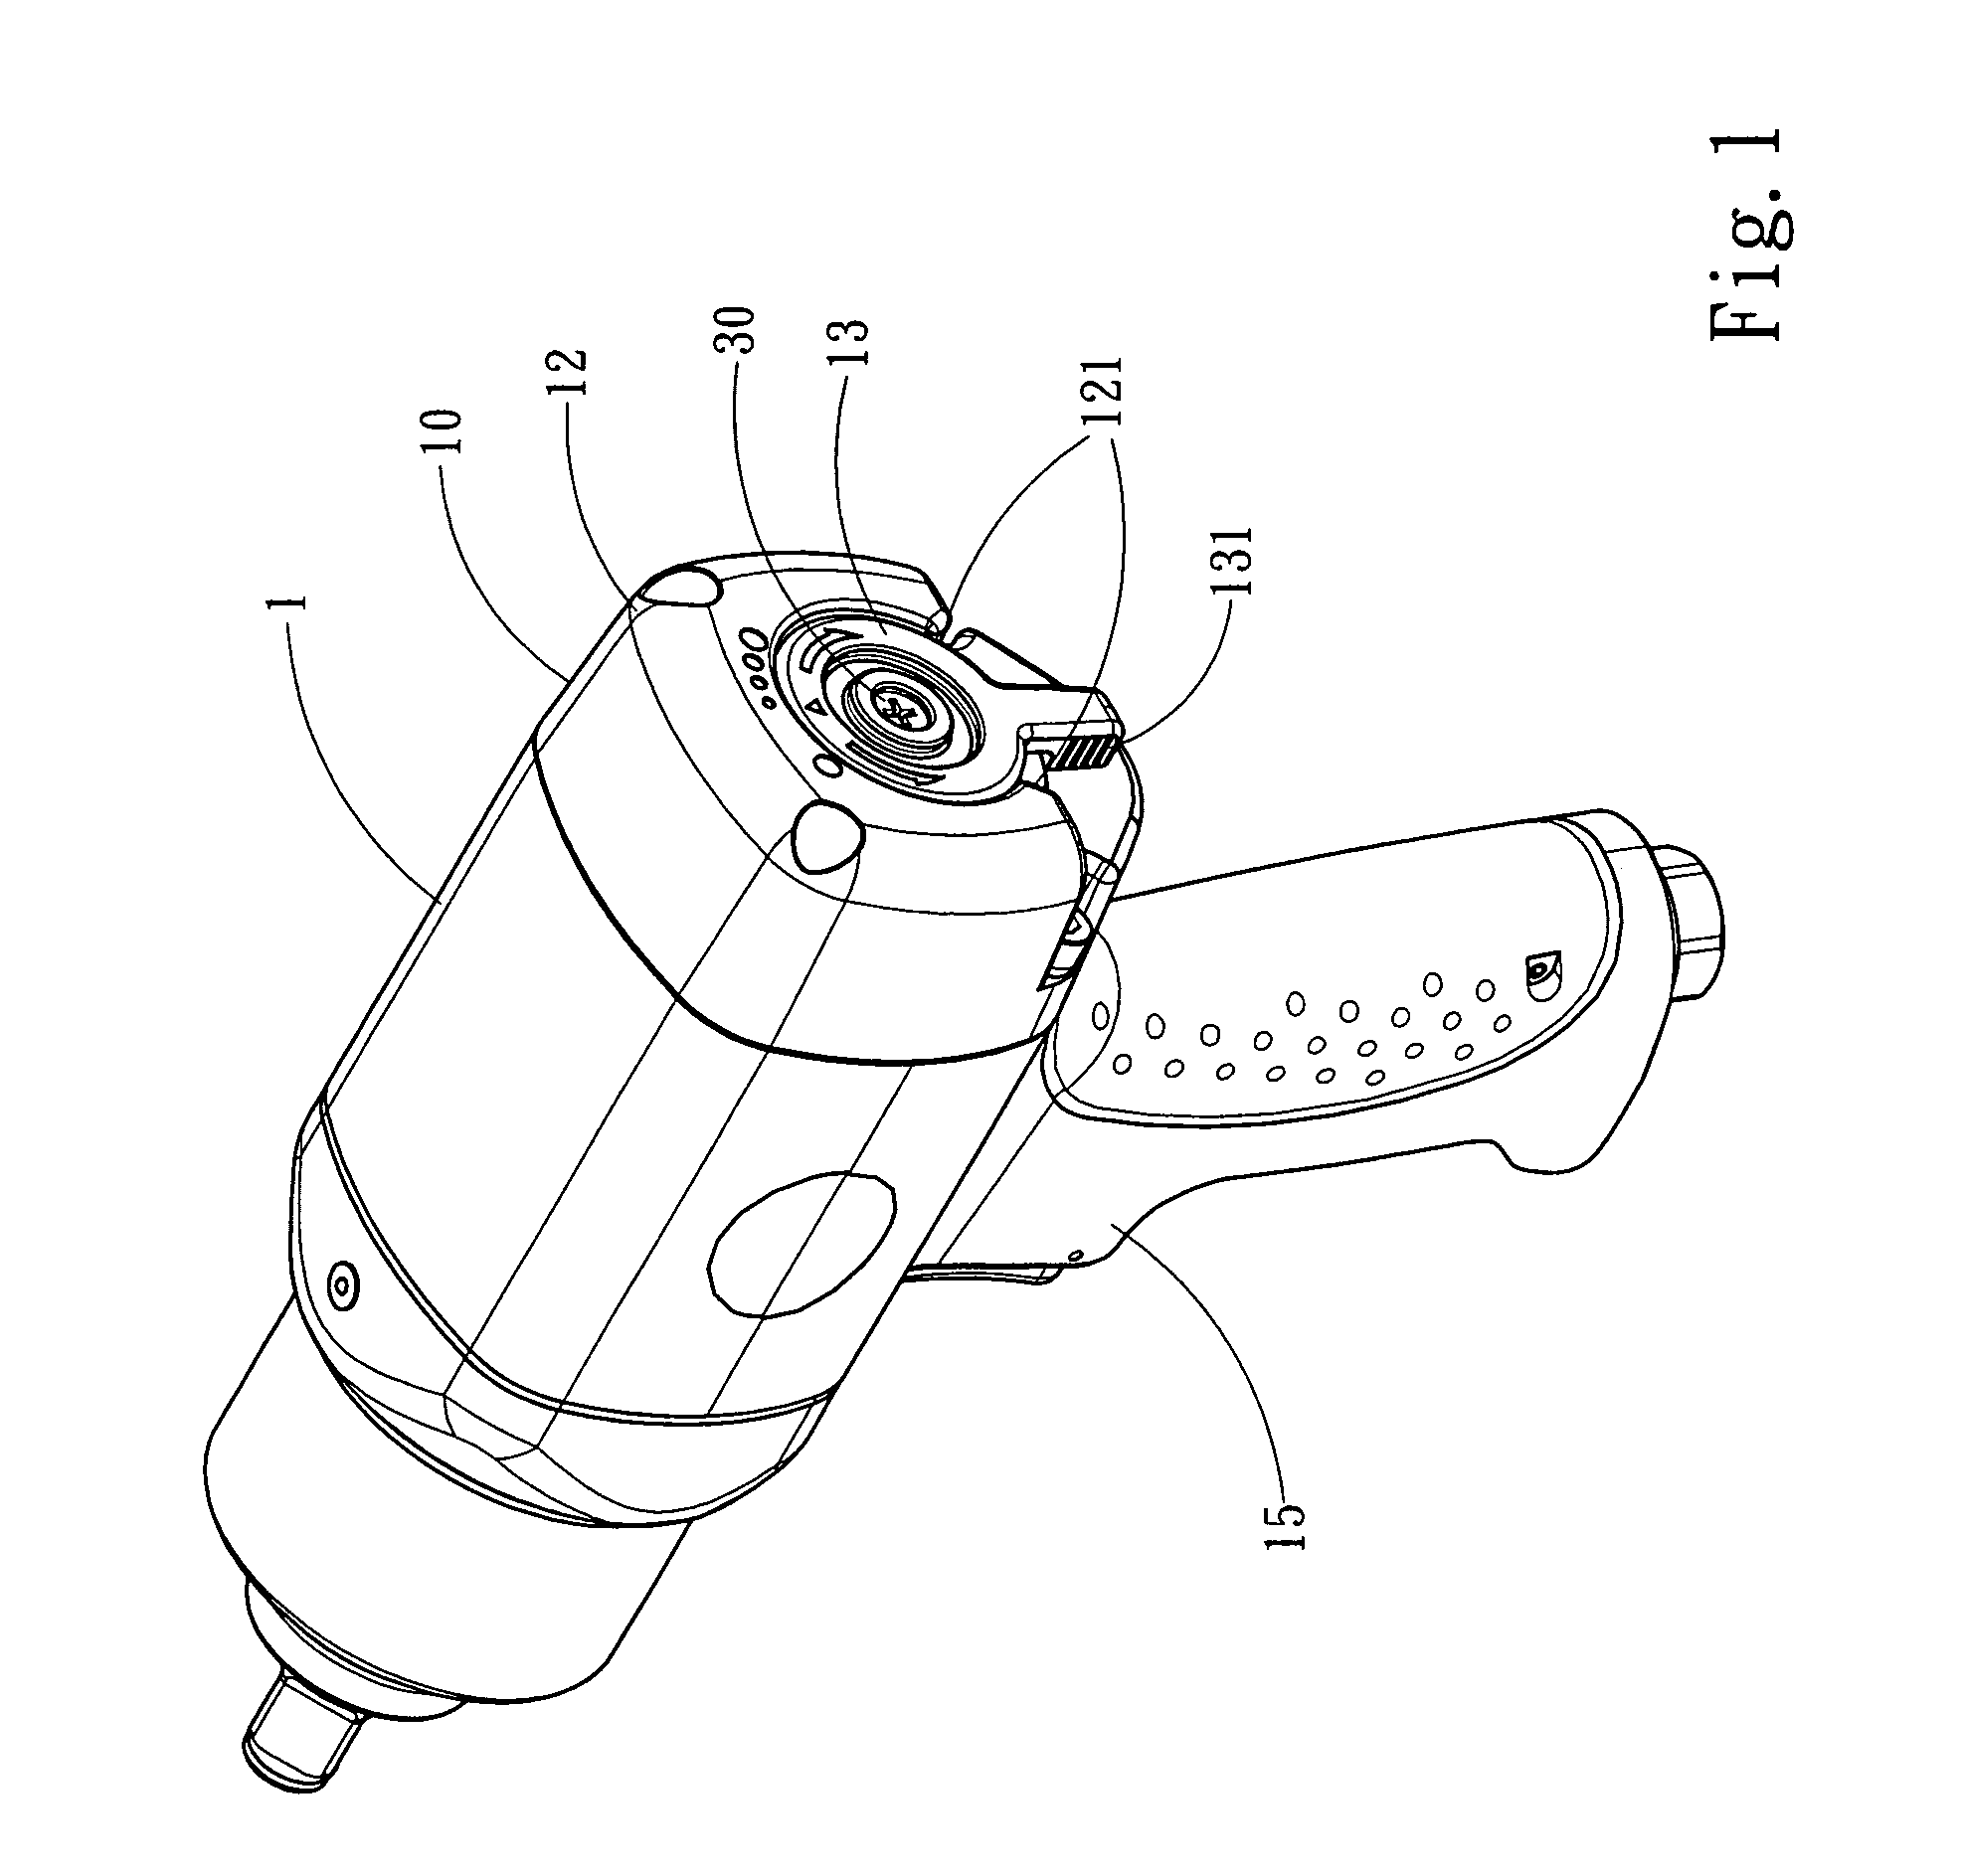 Clockwise or counterclockwise rotation control device of a pneumatic tool